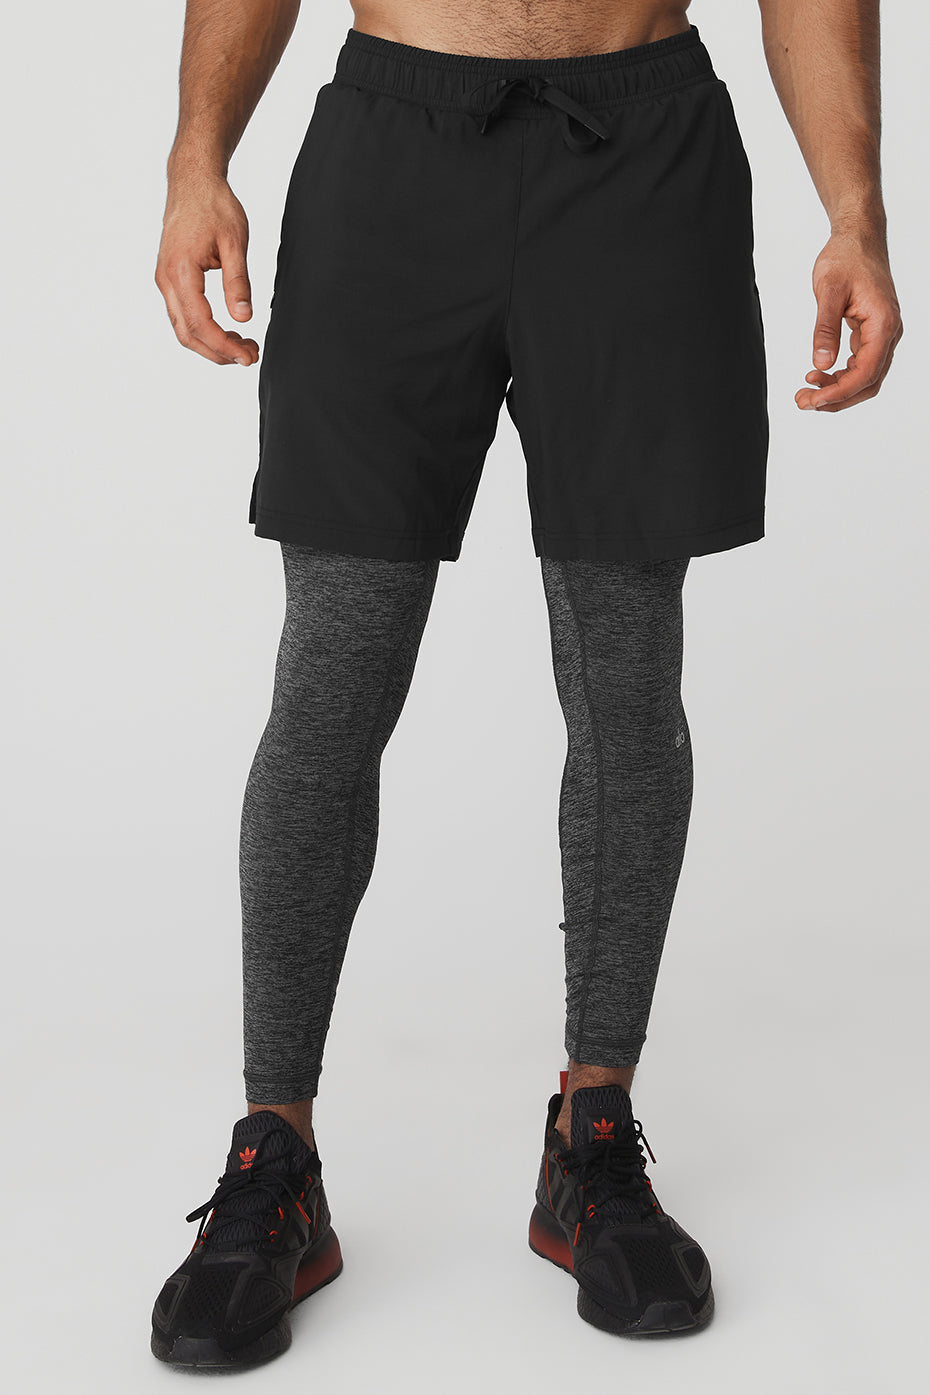 Alo Yoga Men's Warrior Compression Pant  International Society of  Precision Agriculture